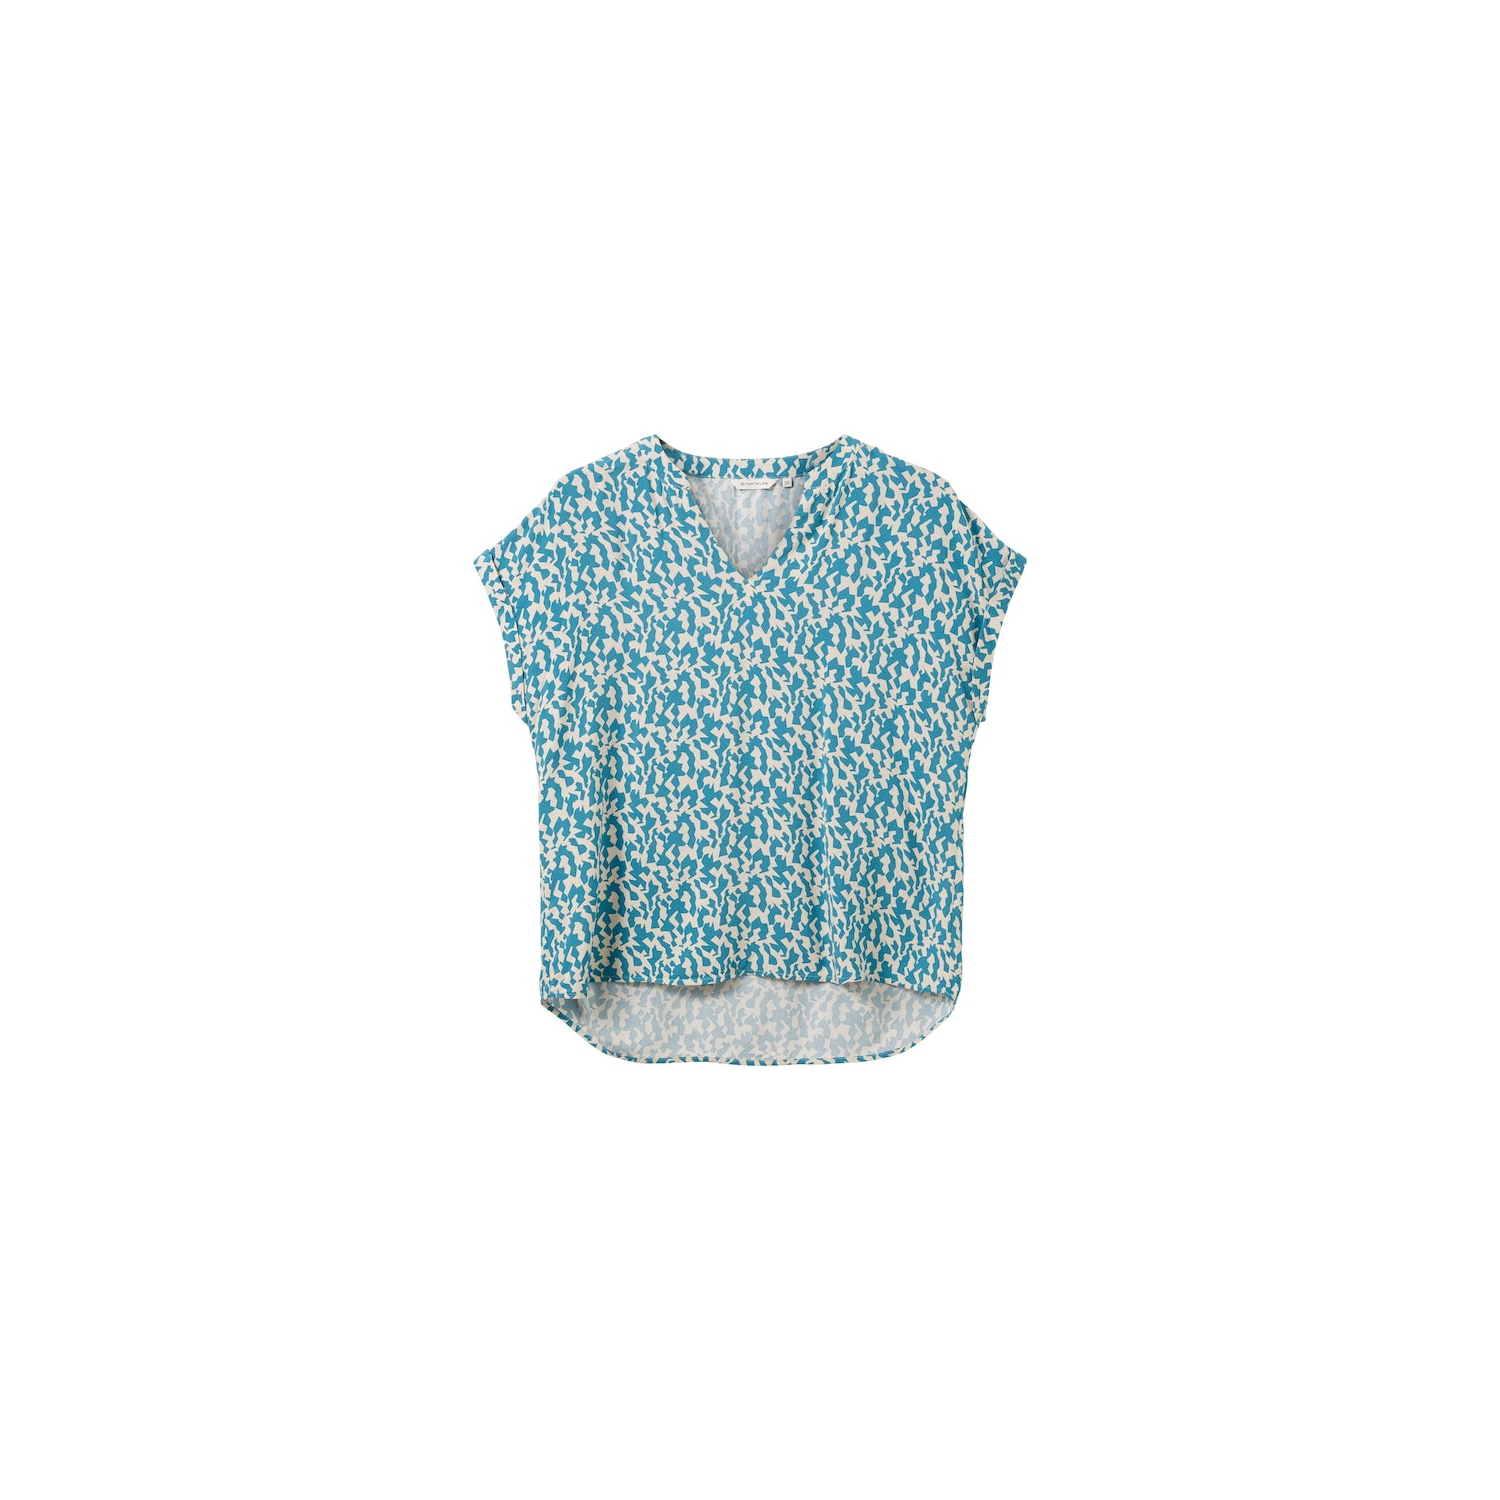 TOM TAILOR Kurzarm-Bluse petrol small abstract design, 25,00 €